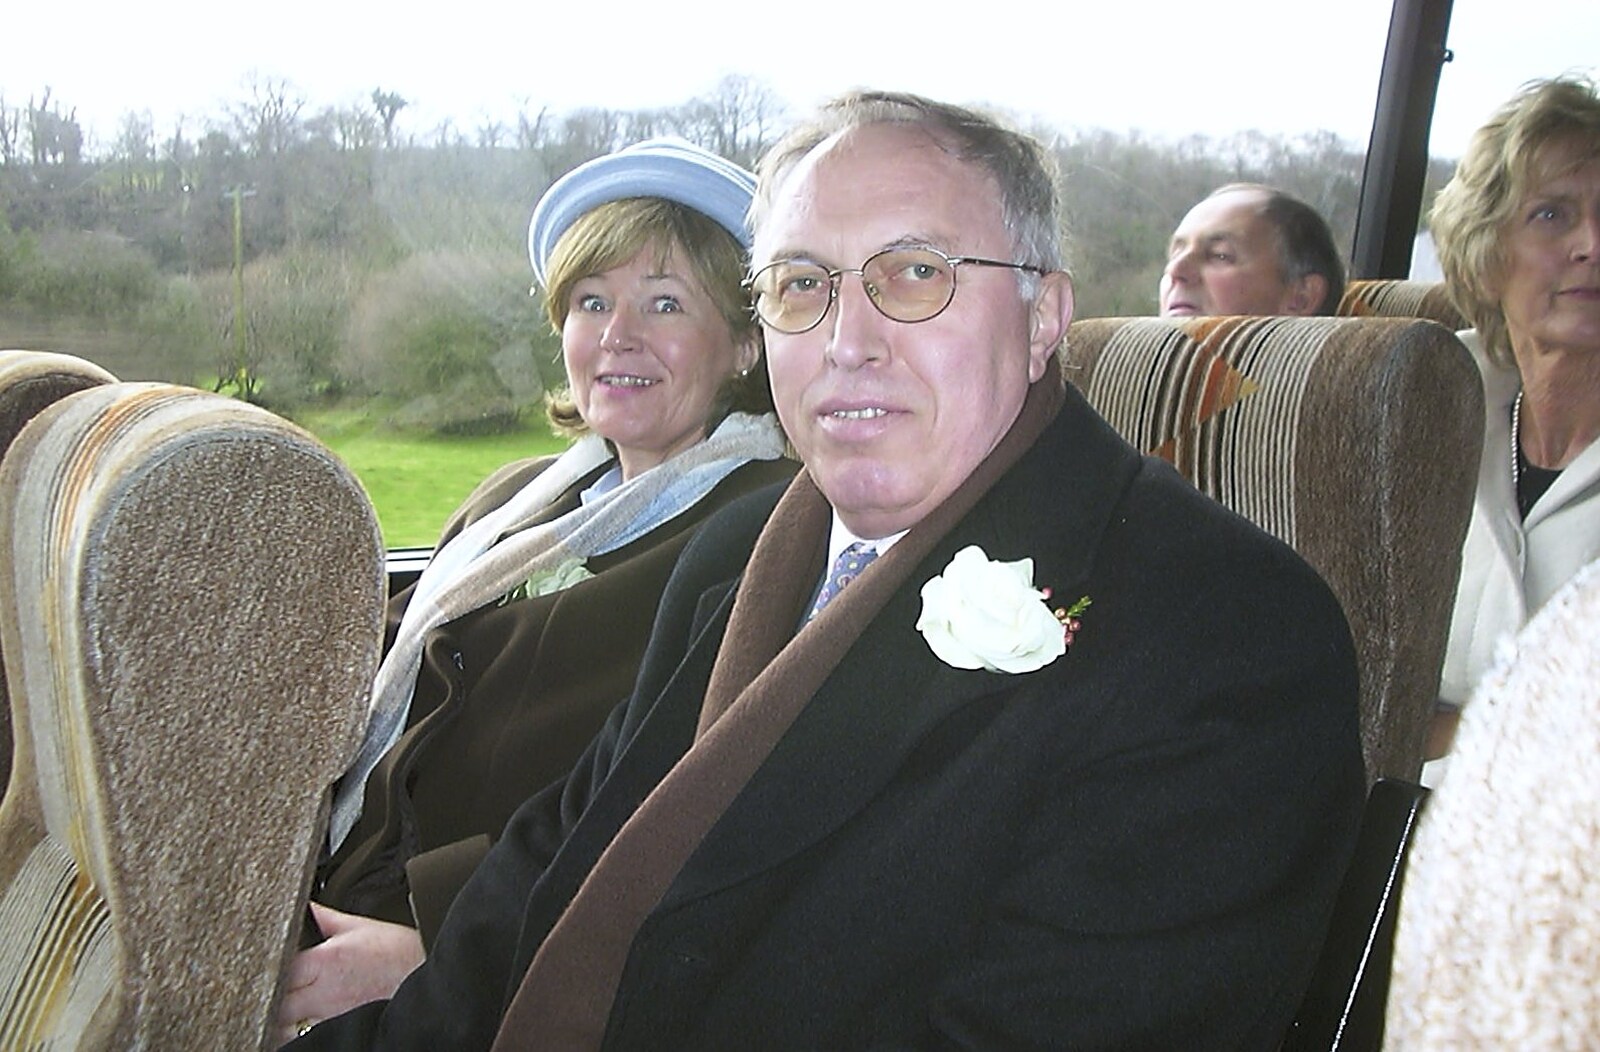 Judith and Bruno on the bus to the reception from Sis's Nearly-Christmas Wedding, Meavy, Dartmoor - 20th December 2003